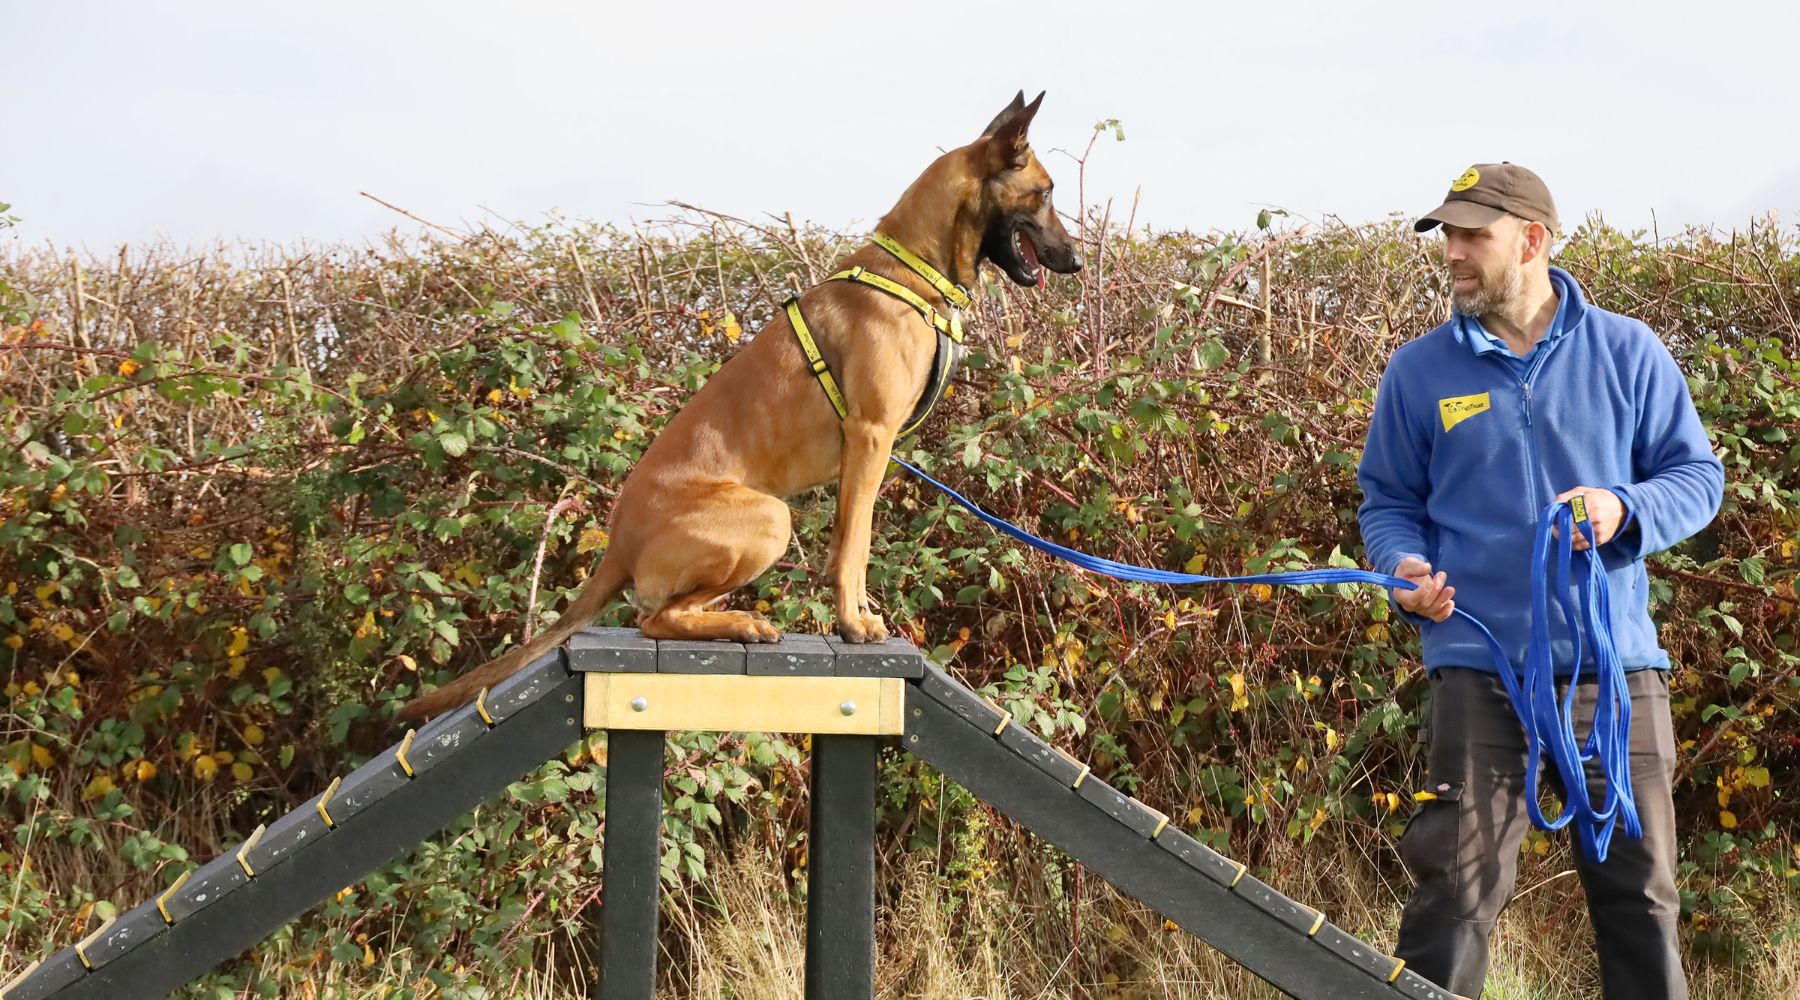 Omaze Million Pound House Lake District. Dogs Trust. Piper the Belgian Malinois stands on a training ramp on a field in the sun